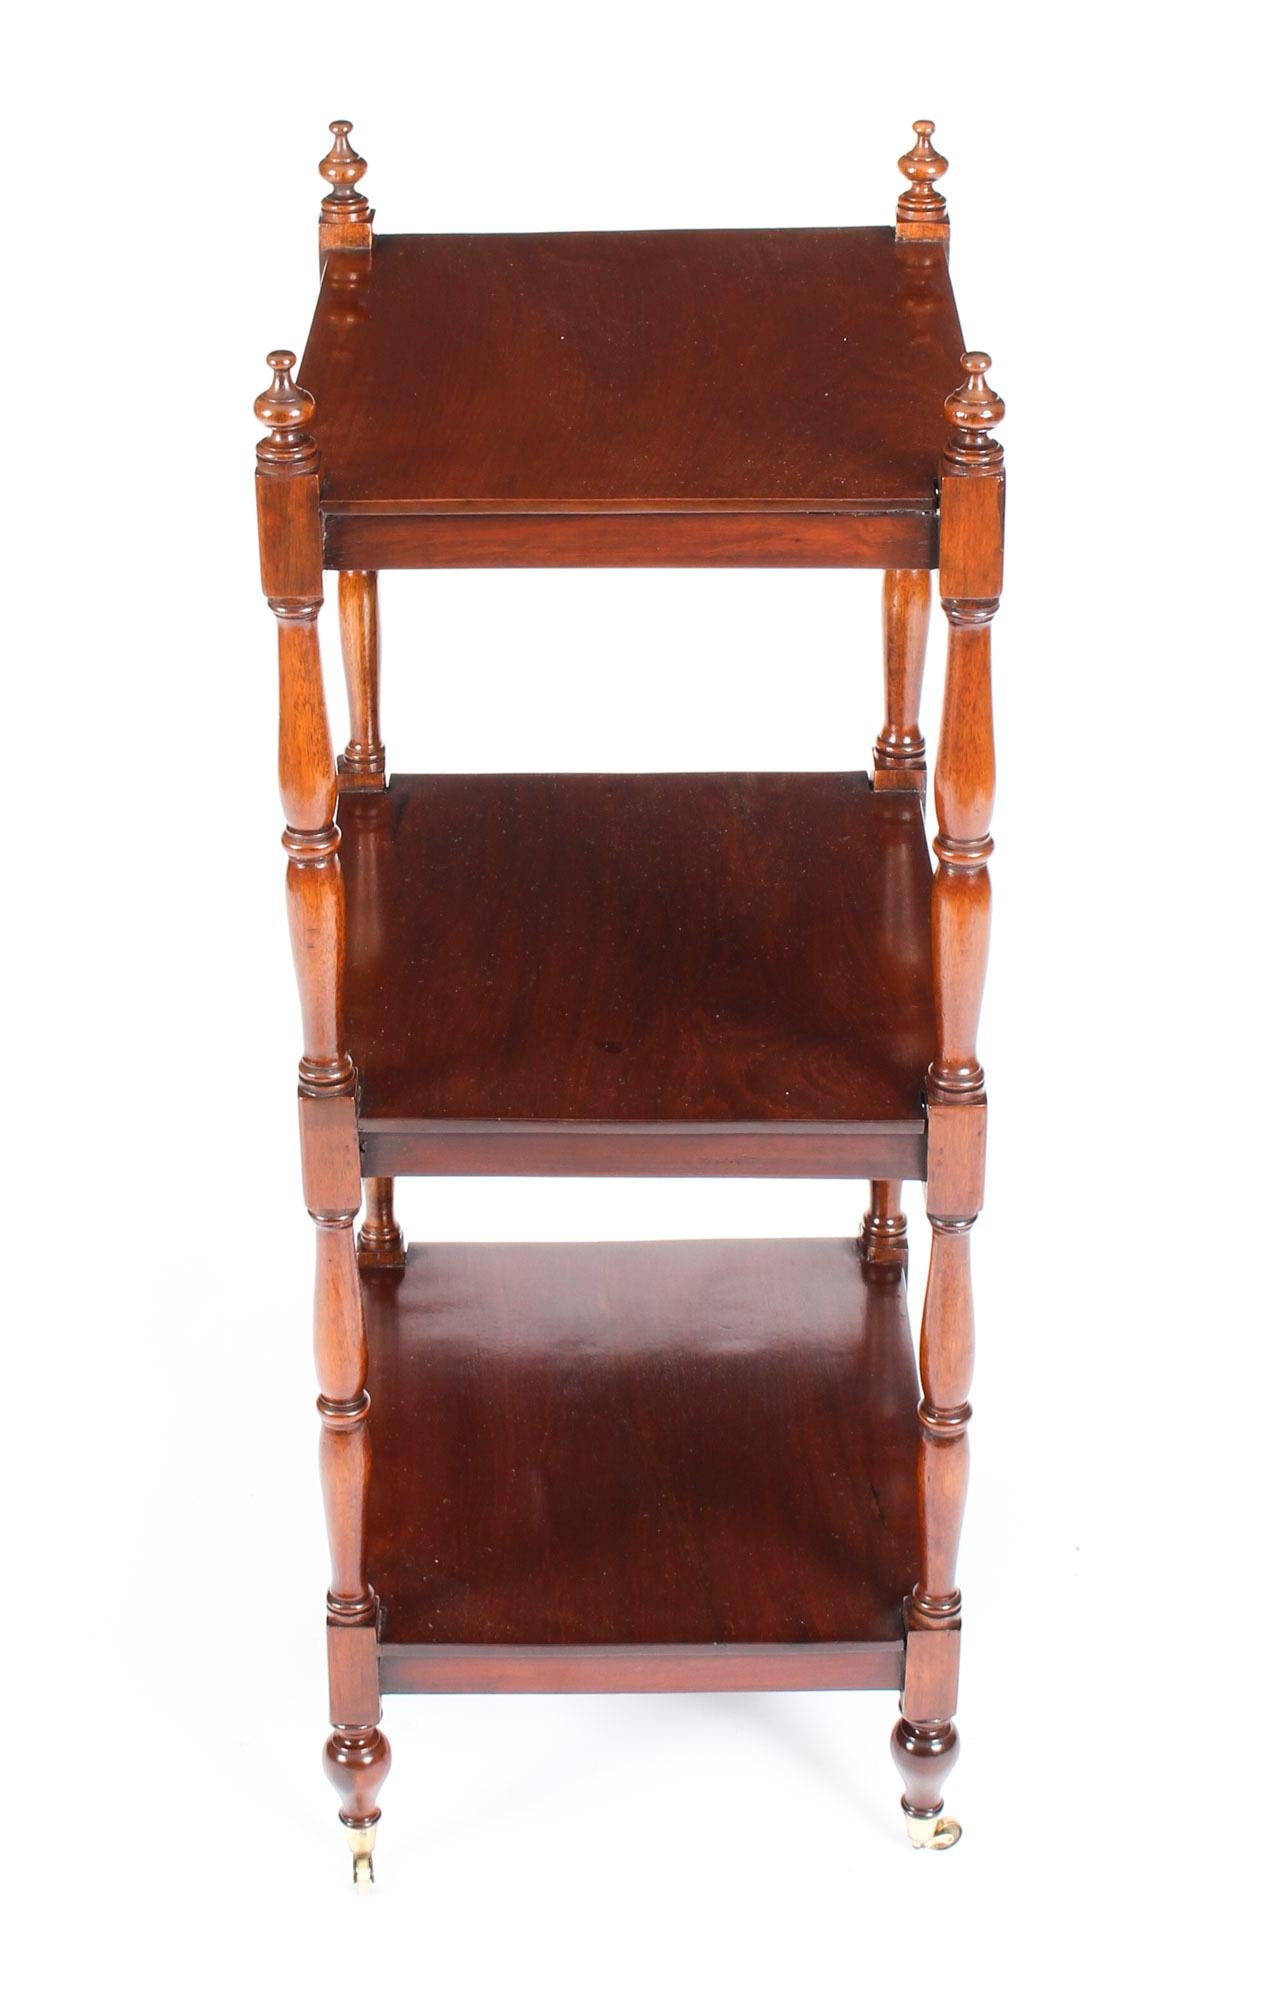 This is a beautiful English Regency Period flame mahogany 